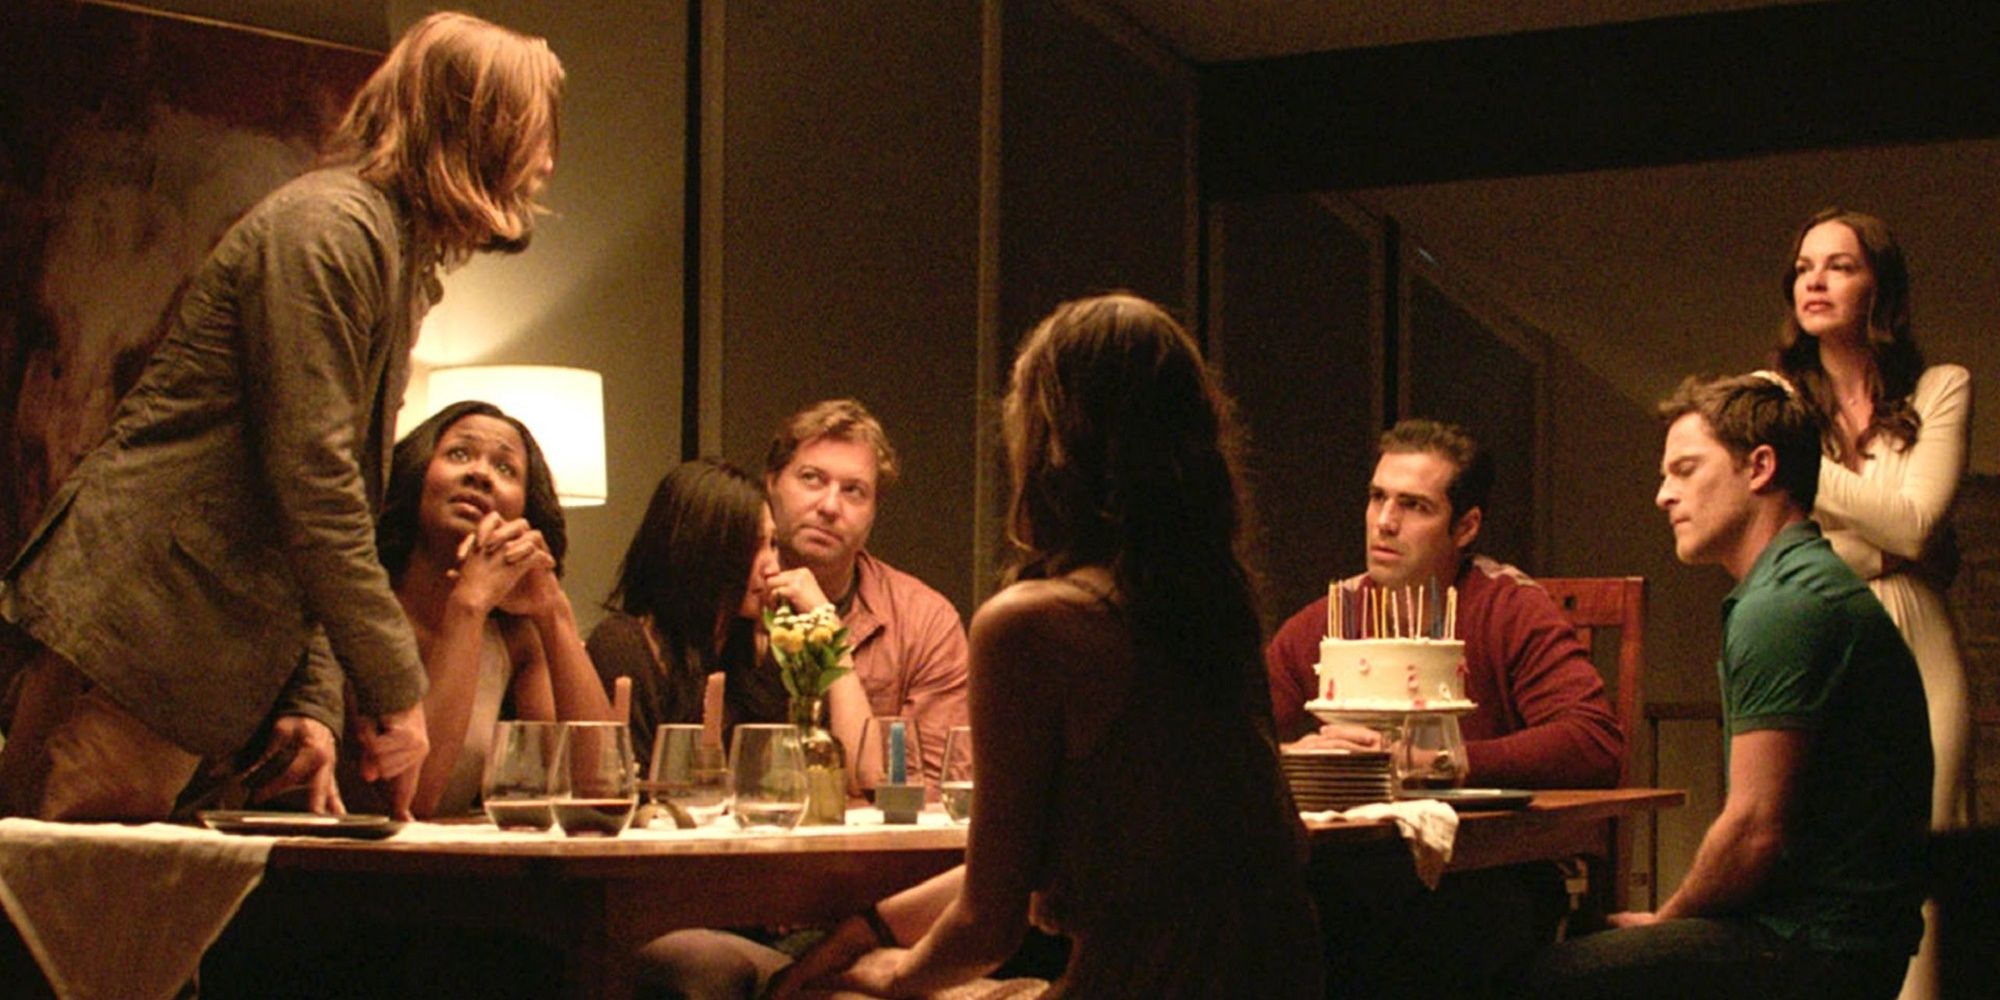 The group of friends at the dinner table in The Invitation